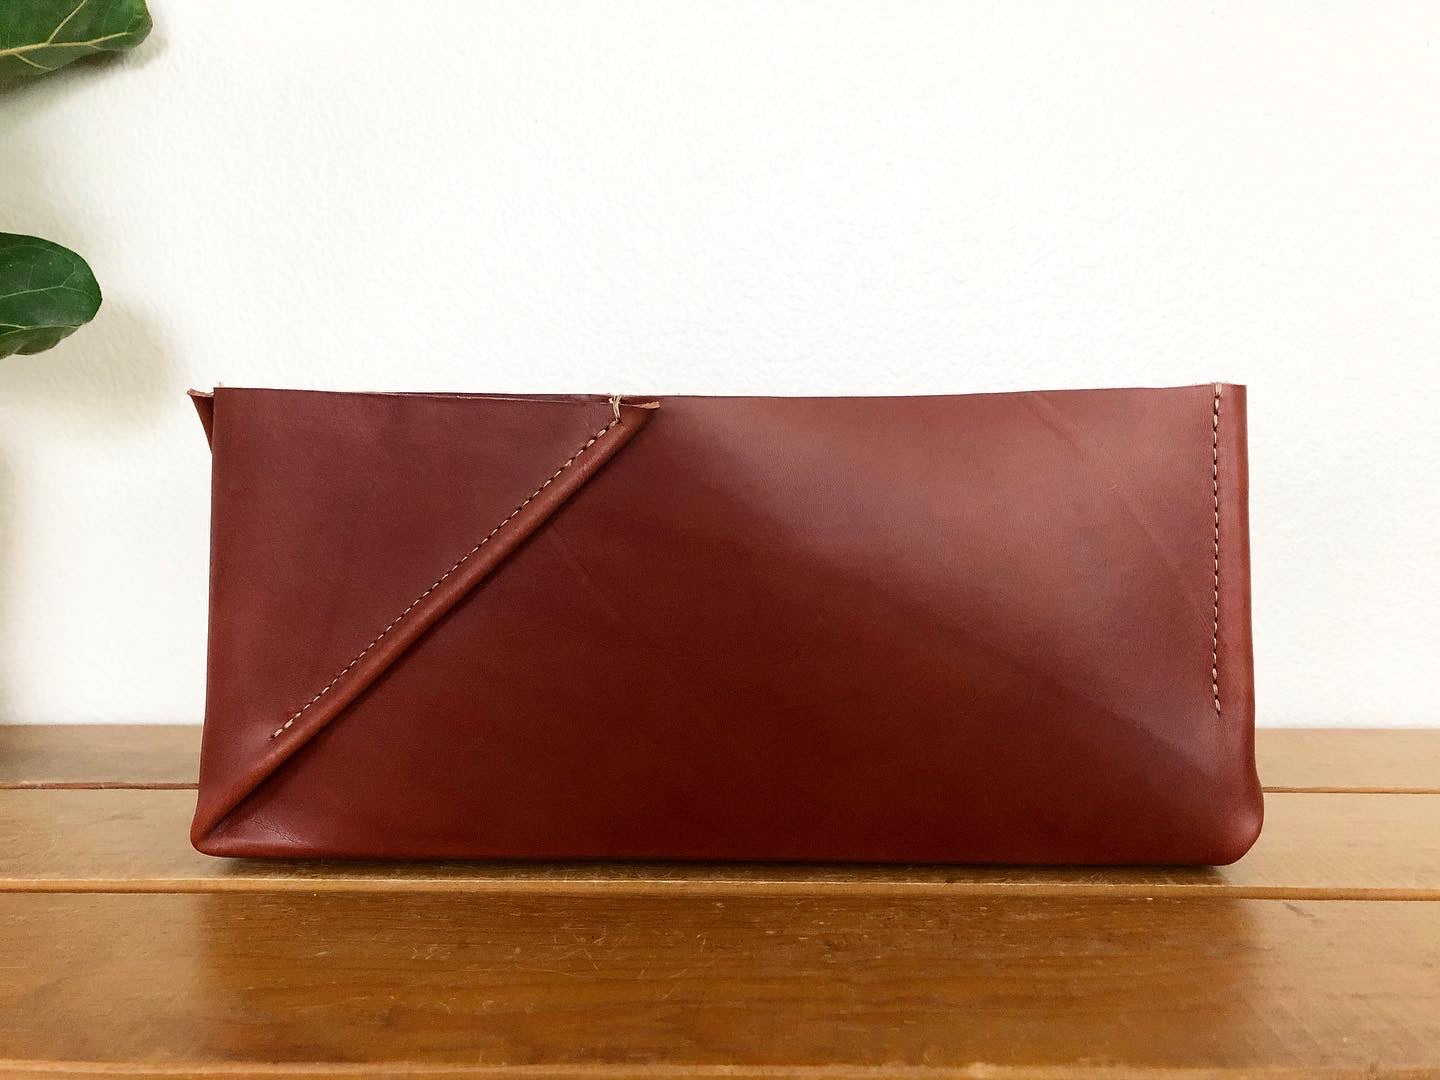 Handsome rectangular brown leather box with folded detail.